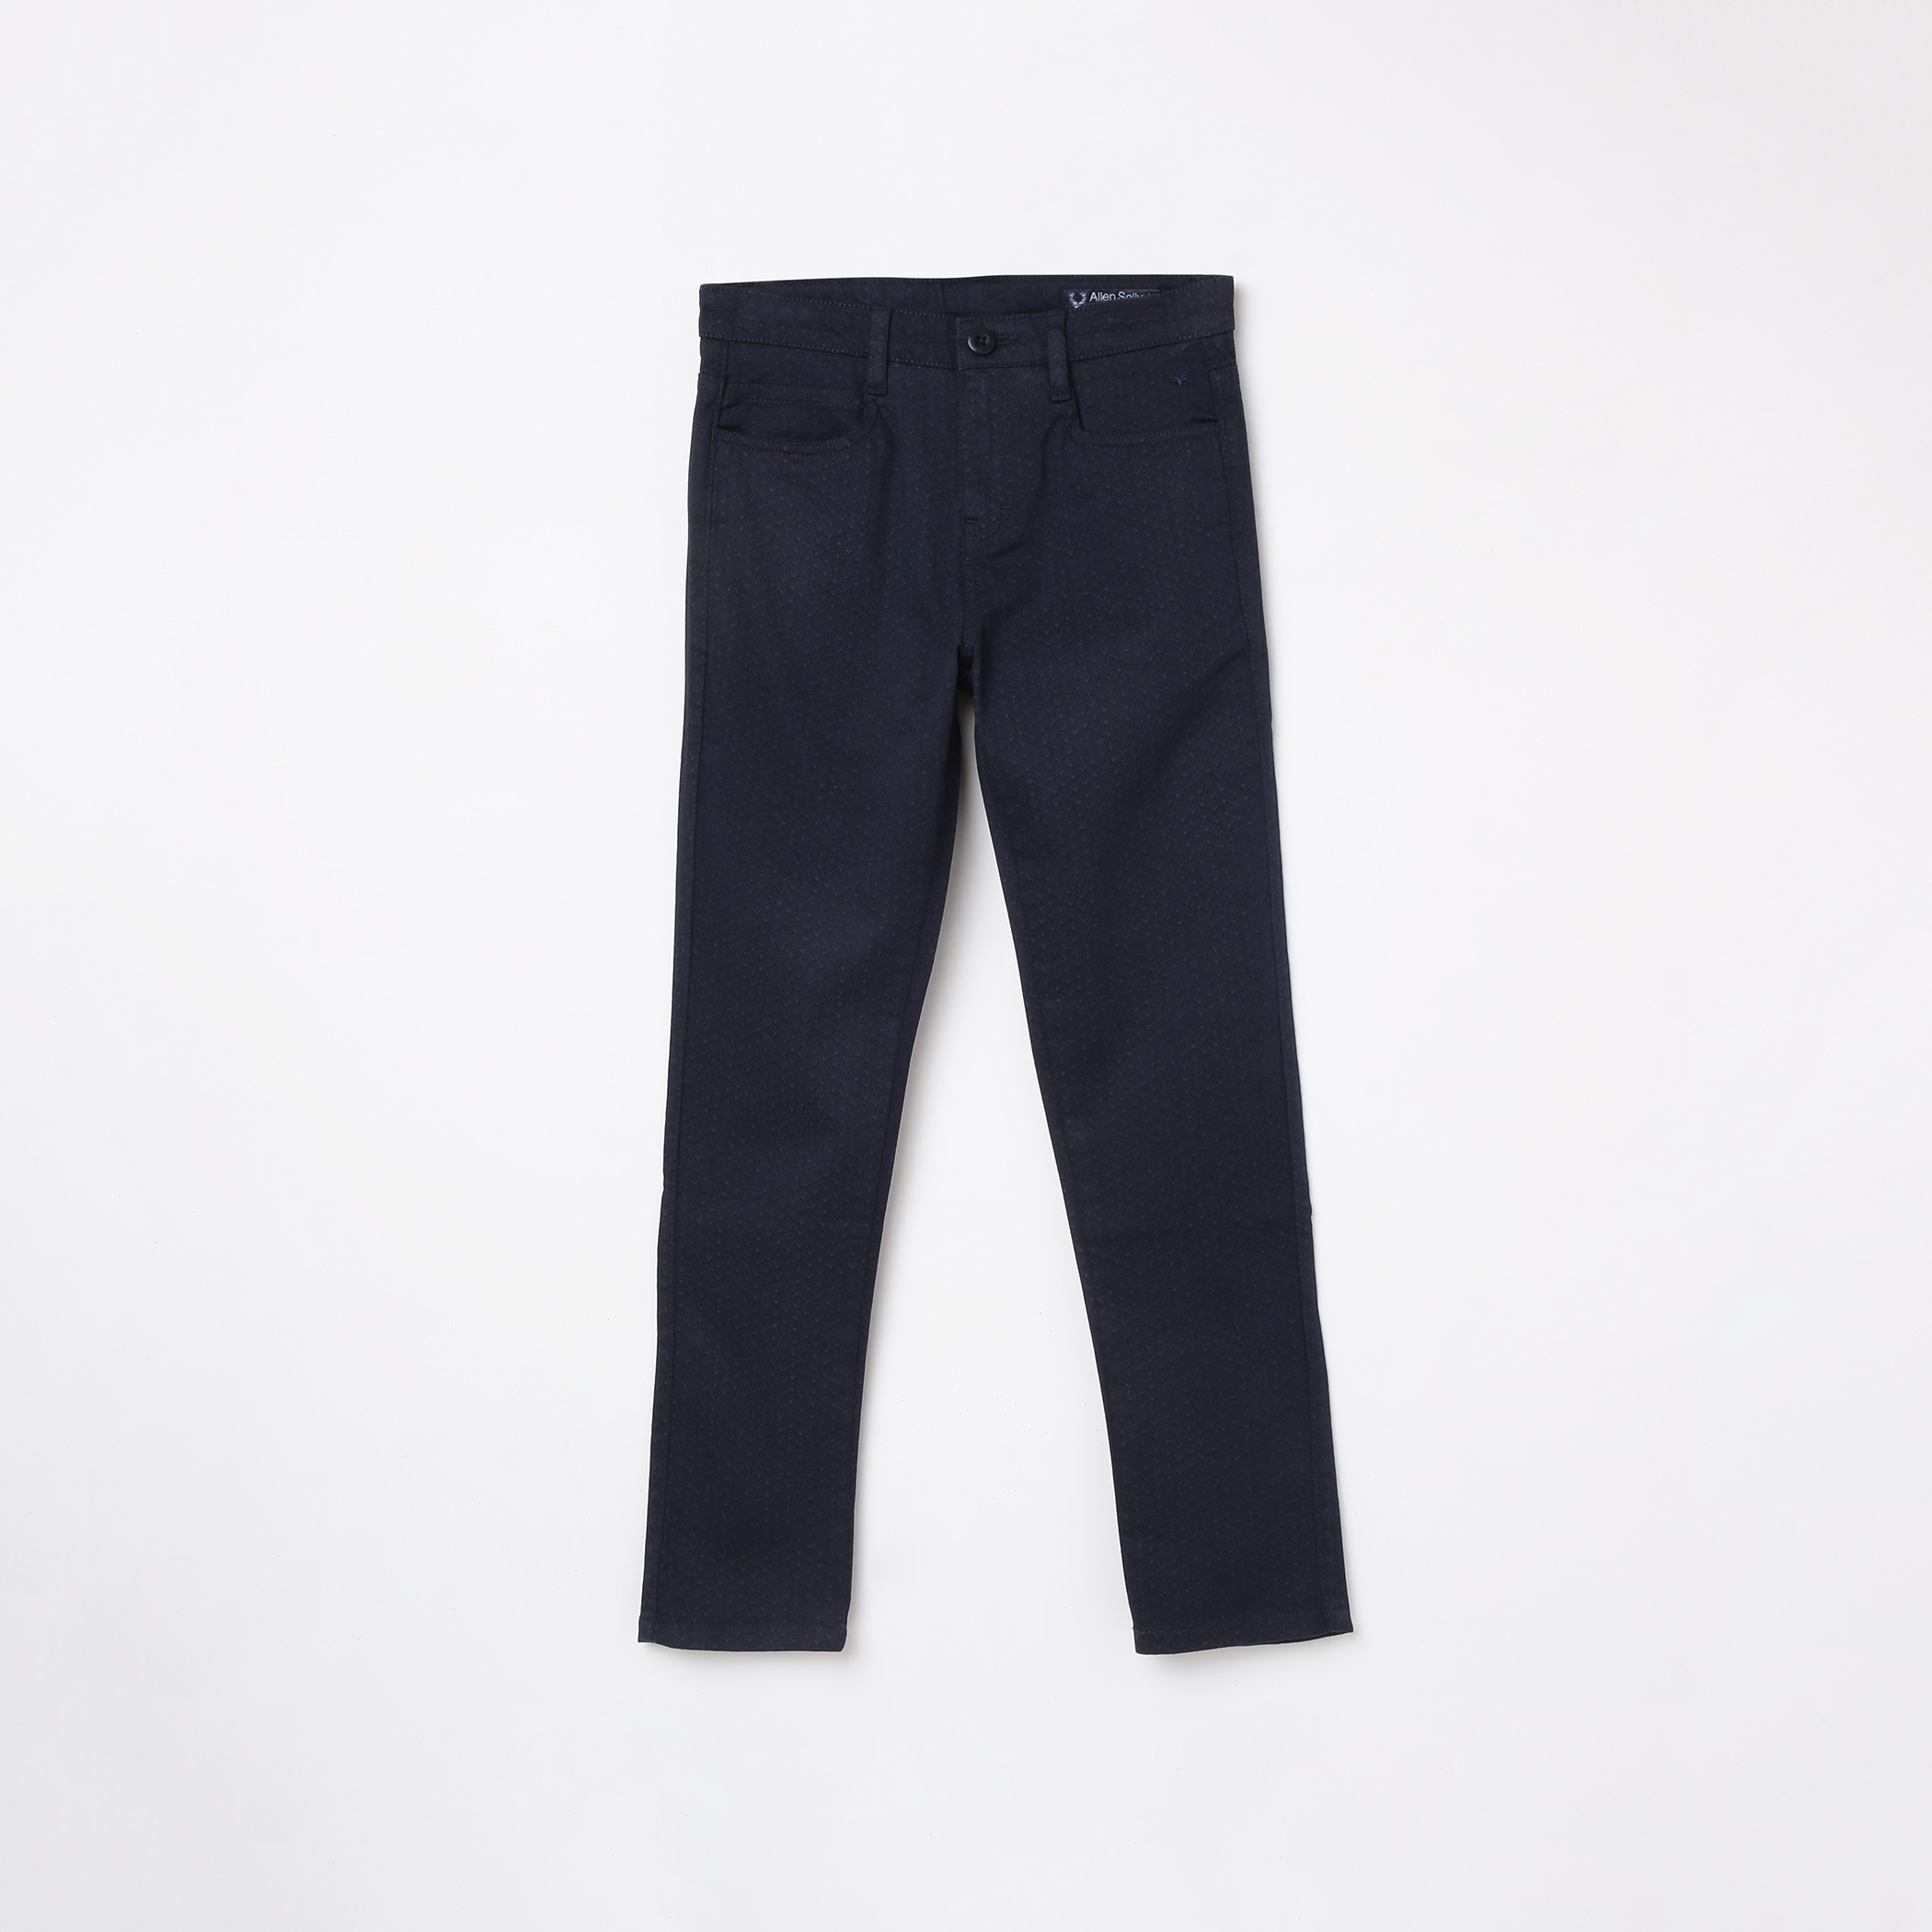 ALLEN SOLLY Boys Textured Trousers